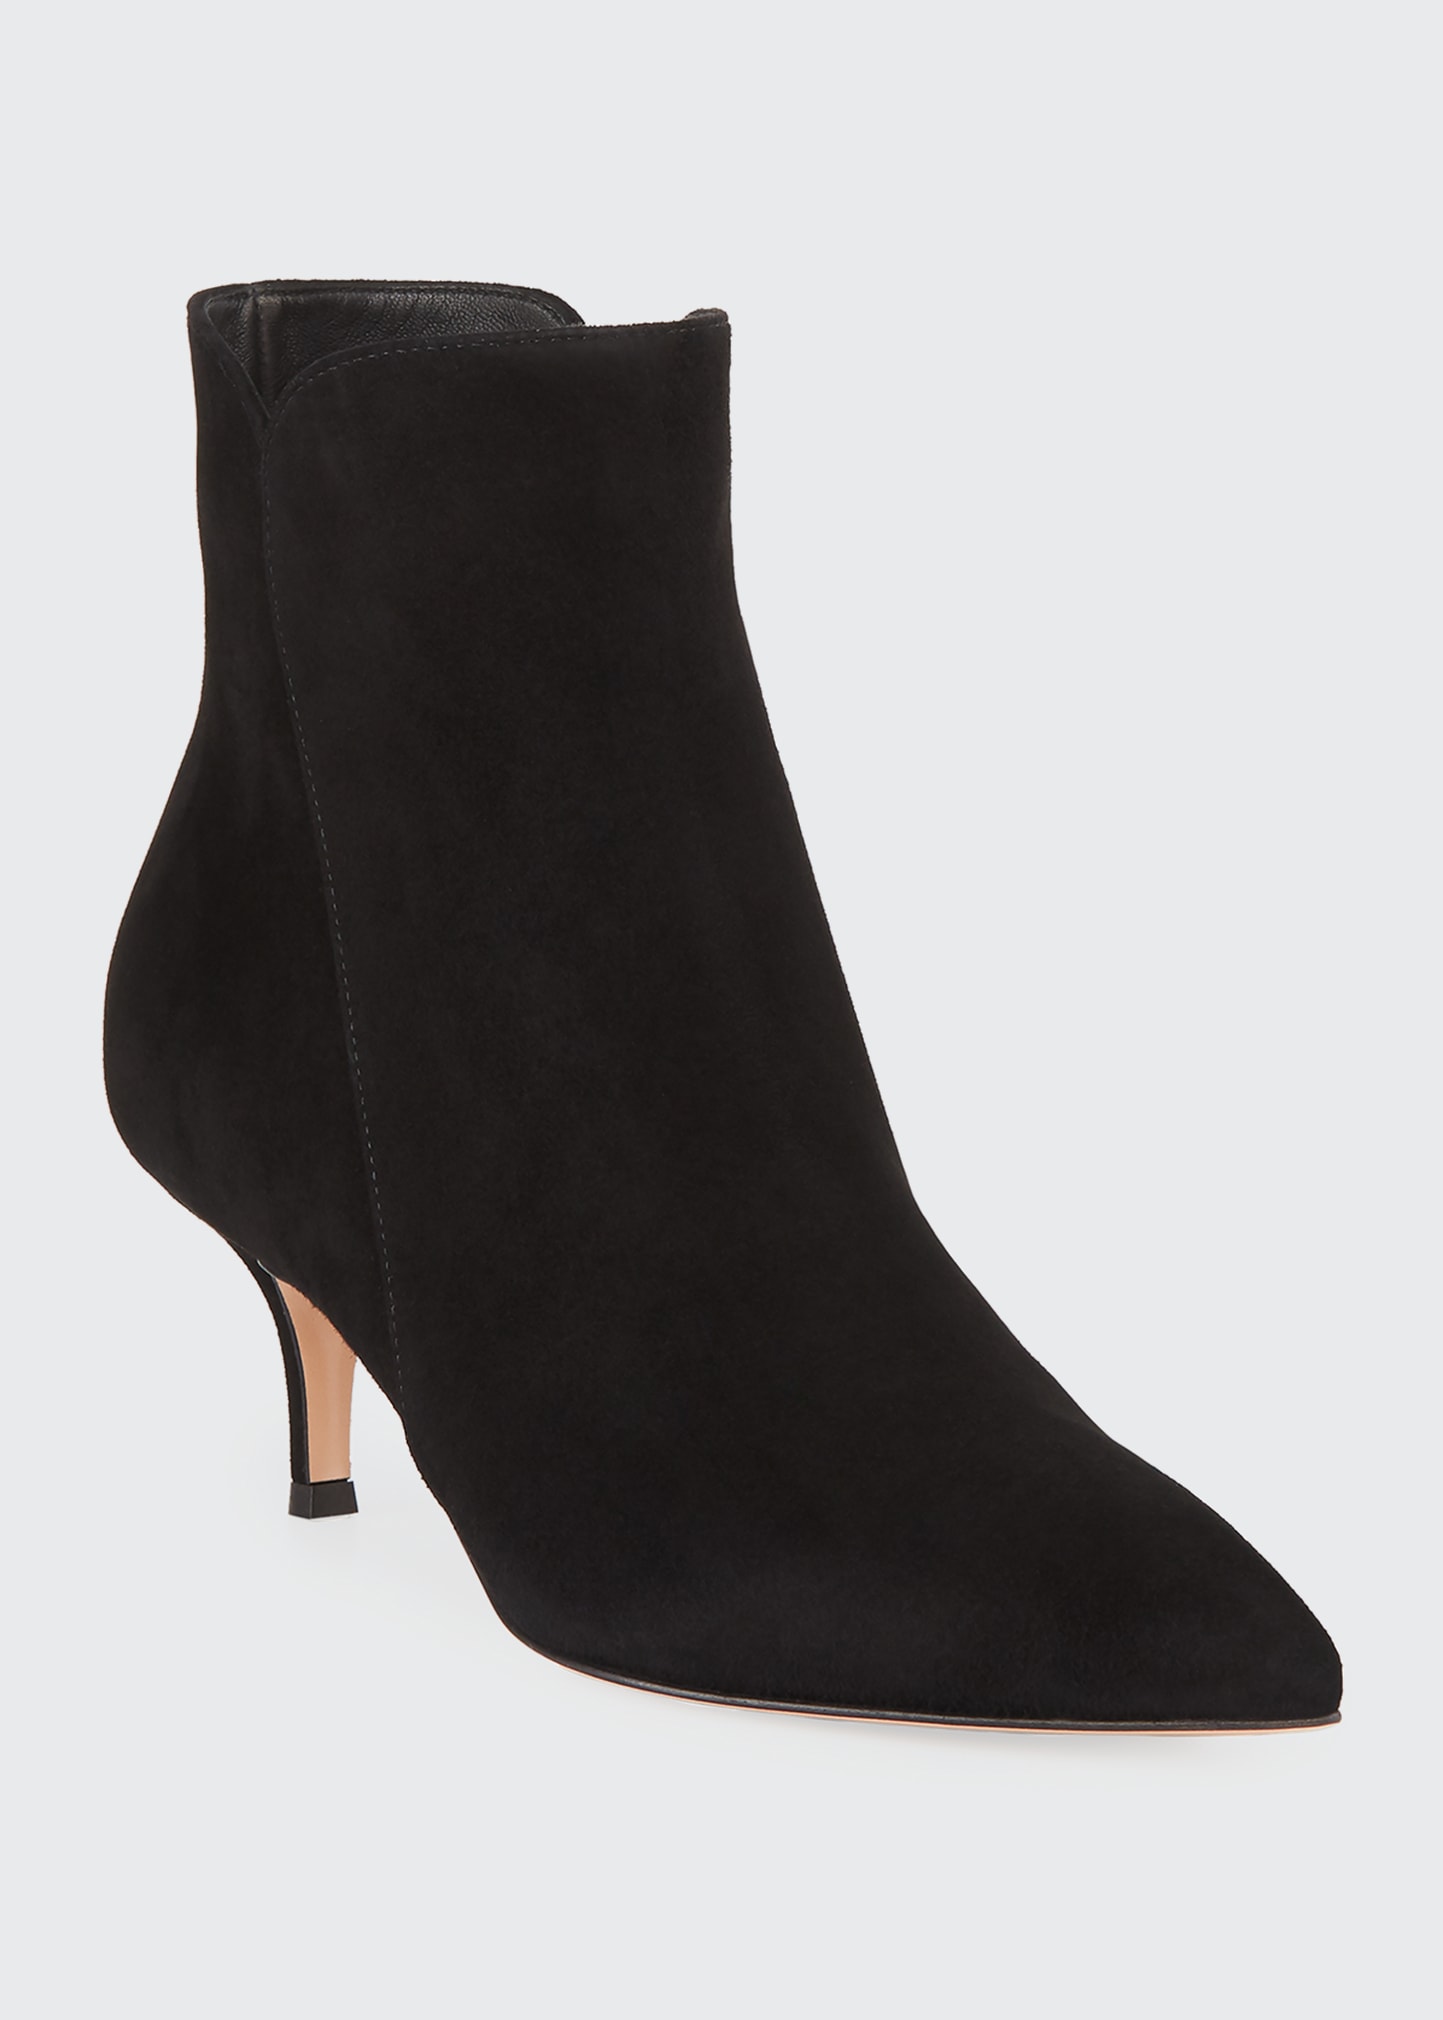 Gianvito Rossi Suede Pointed-Toe Bootie